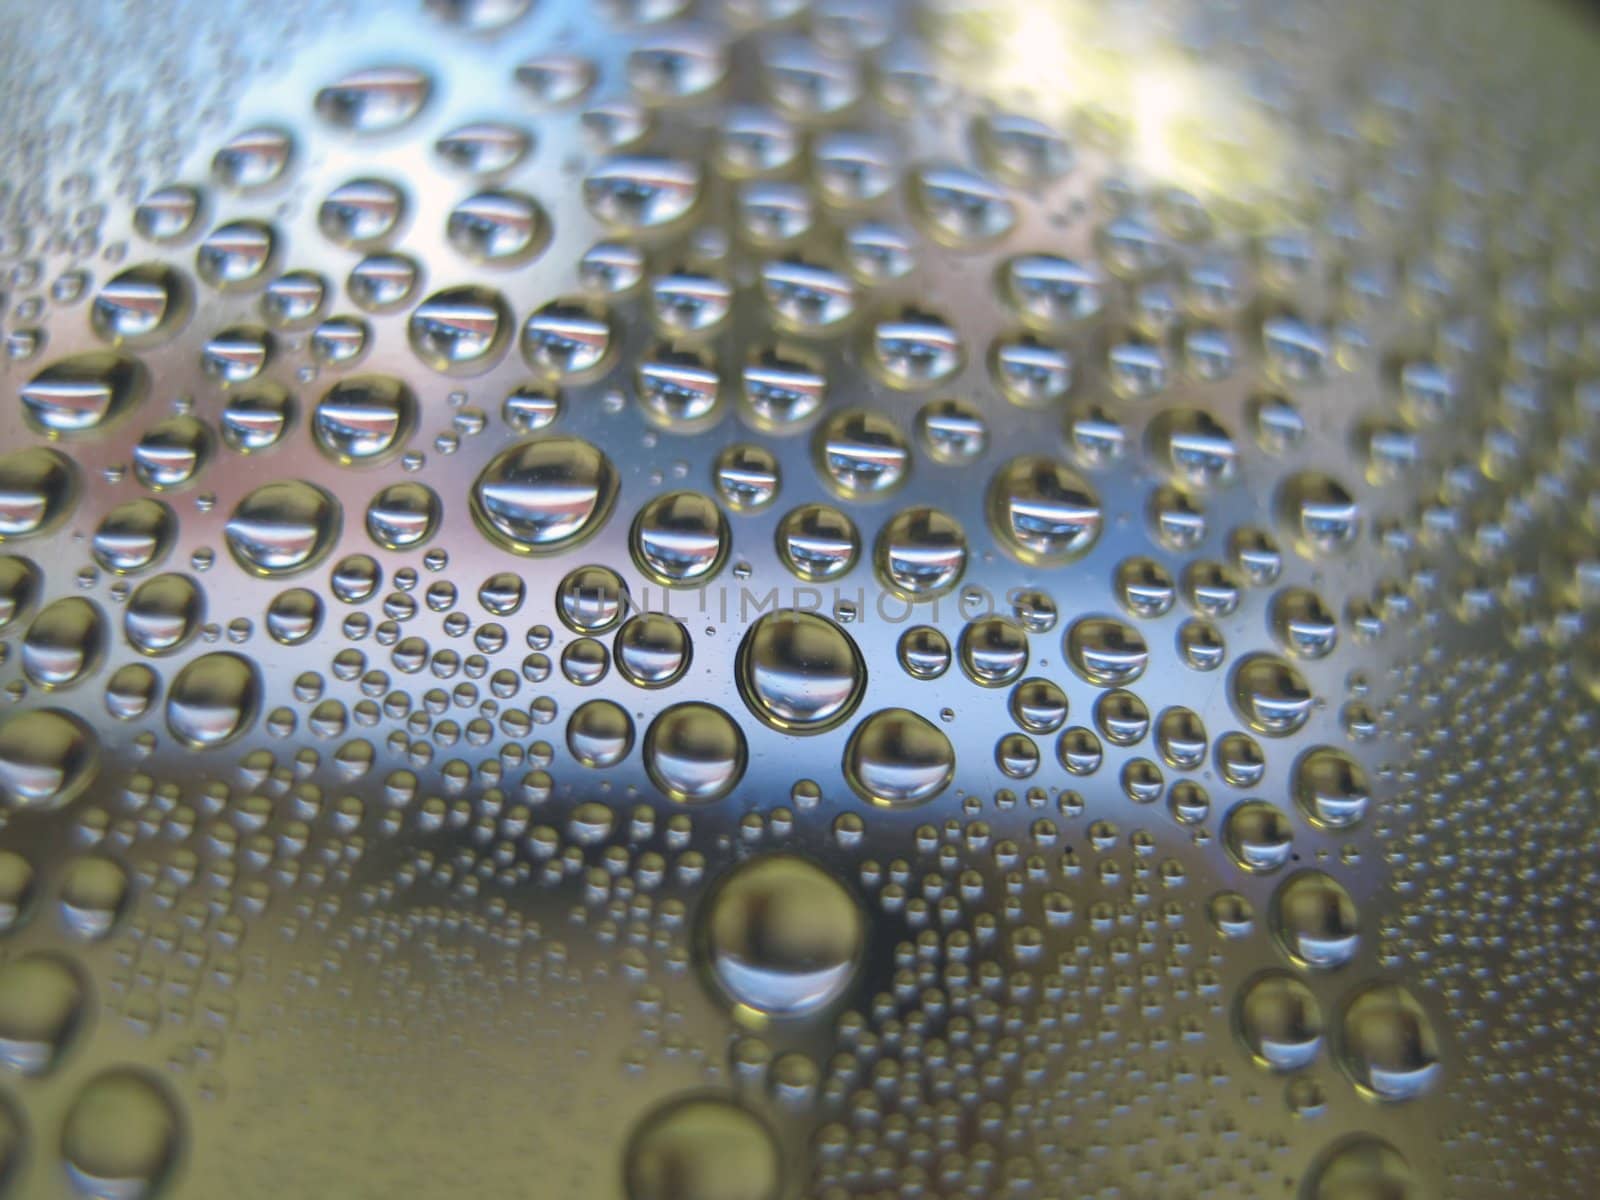 Water drops on the curve transparent surface. Shallow DOF.                                  